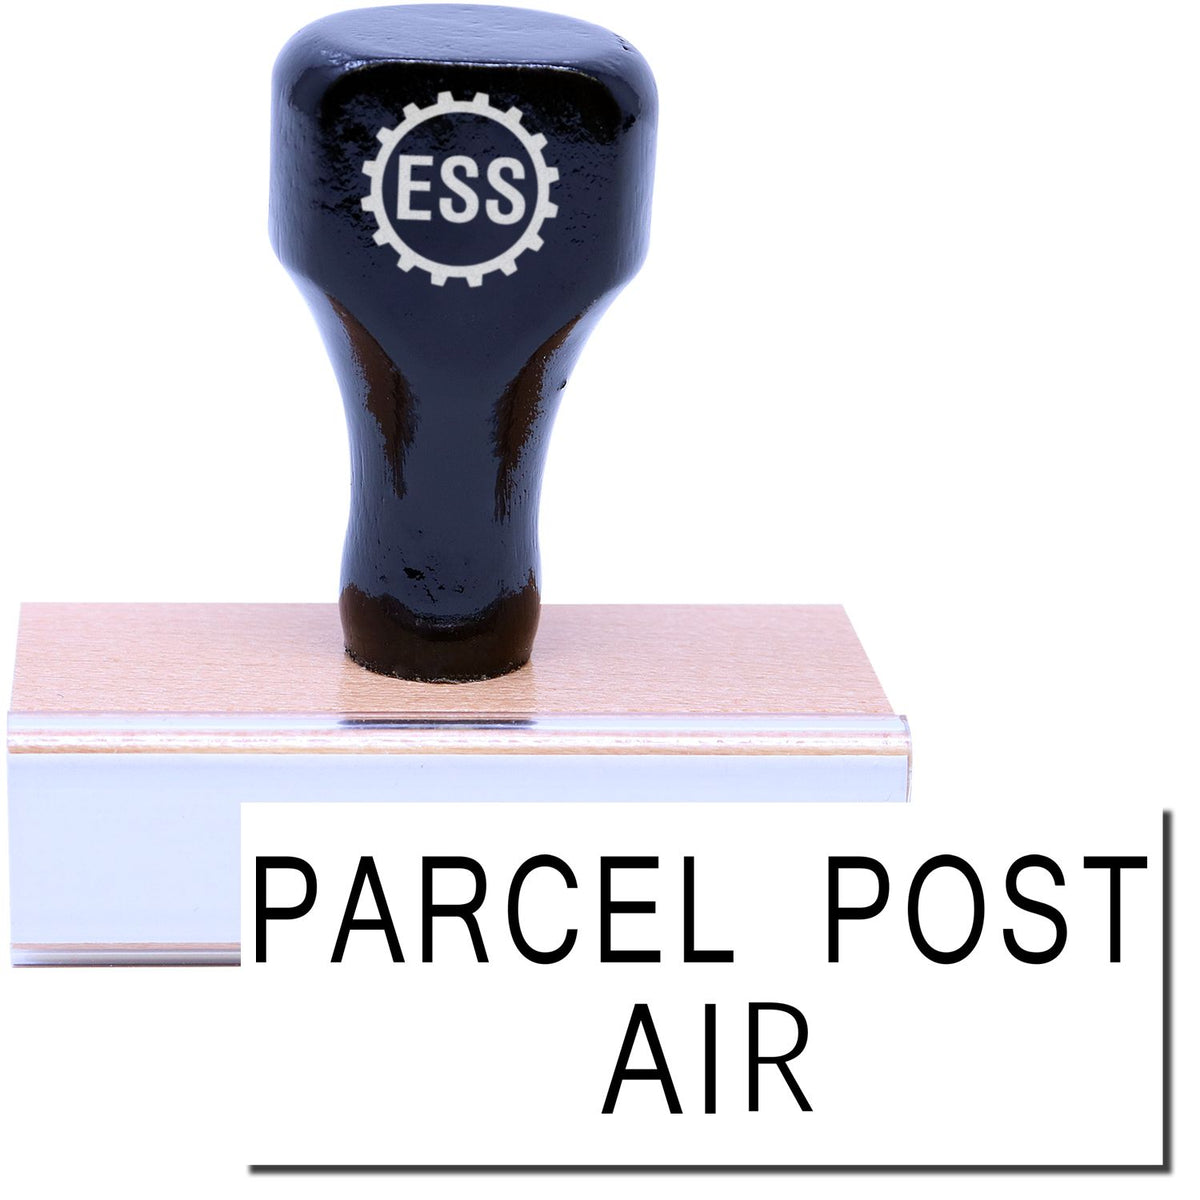 A stock office rubber stamp with a stamped image showing how the text &quot;PARCEL POST AIR&quot; is displayed after stamping.